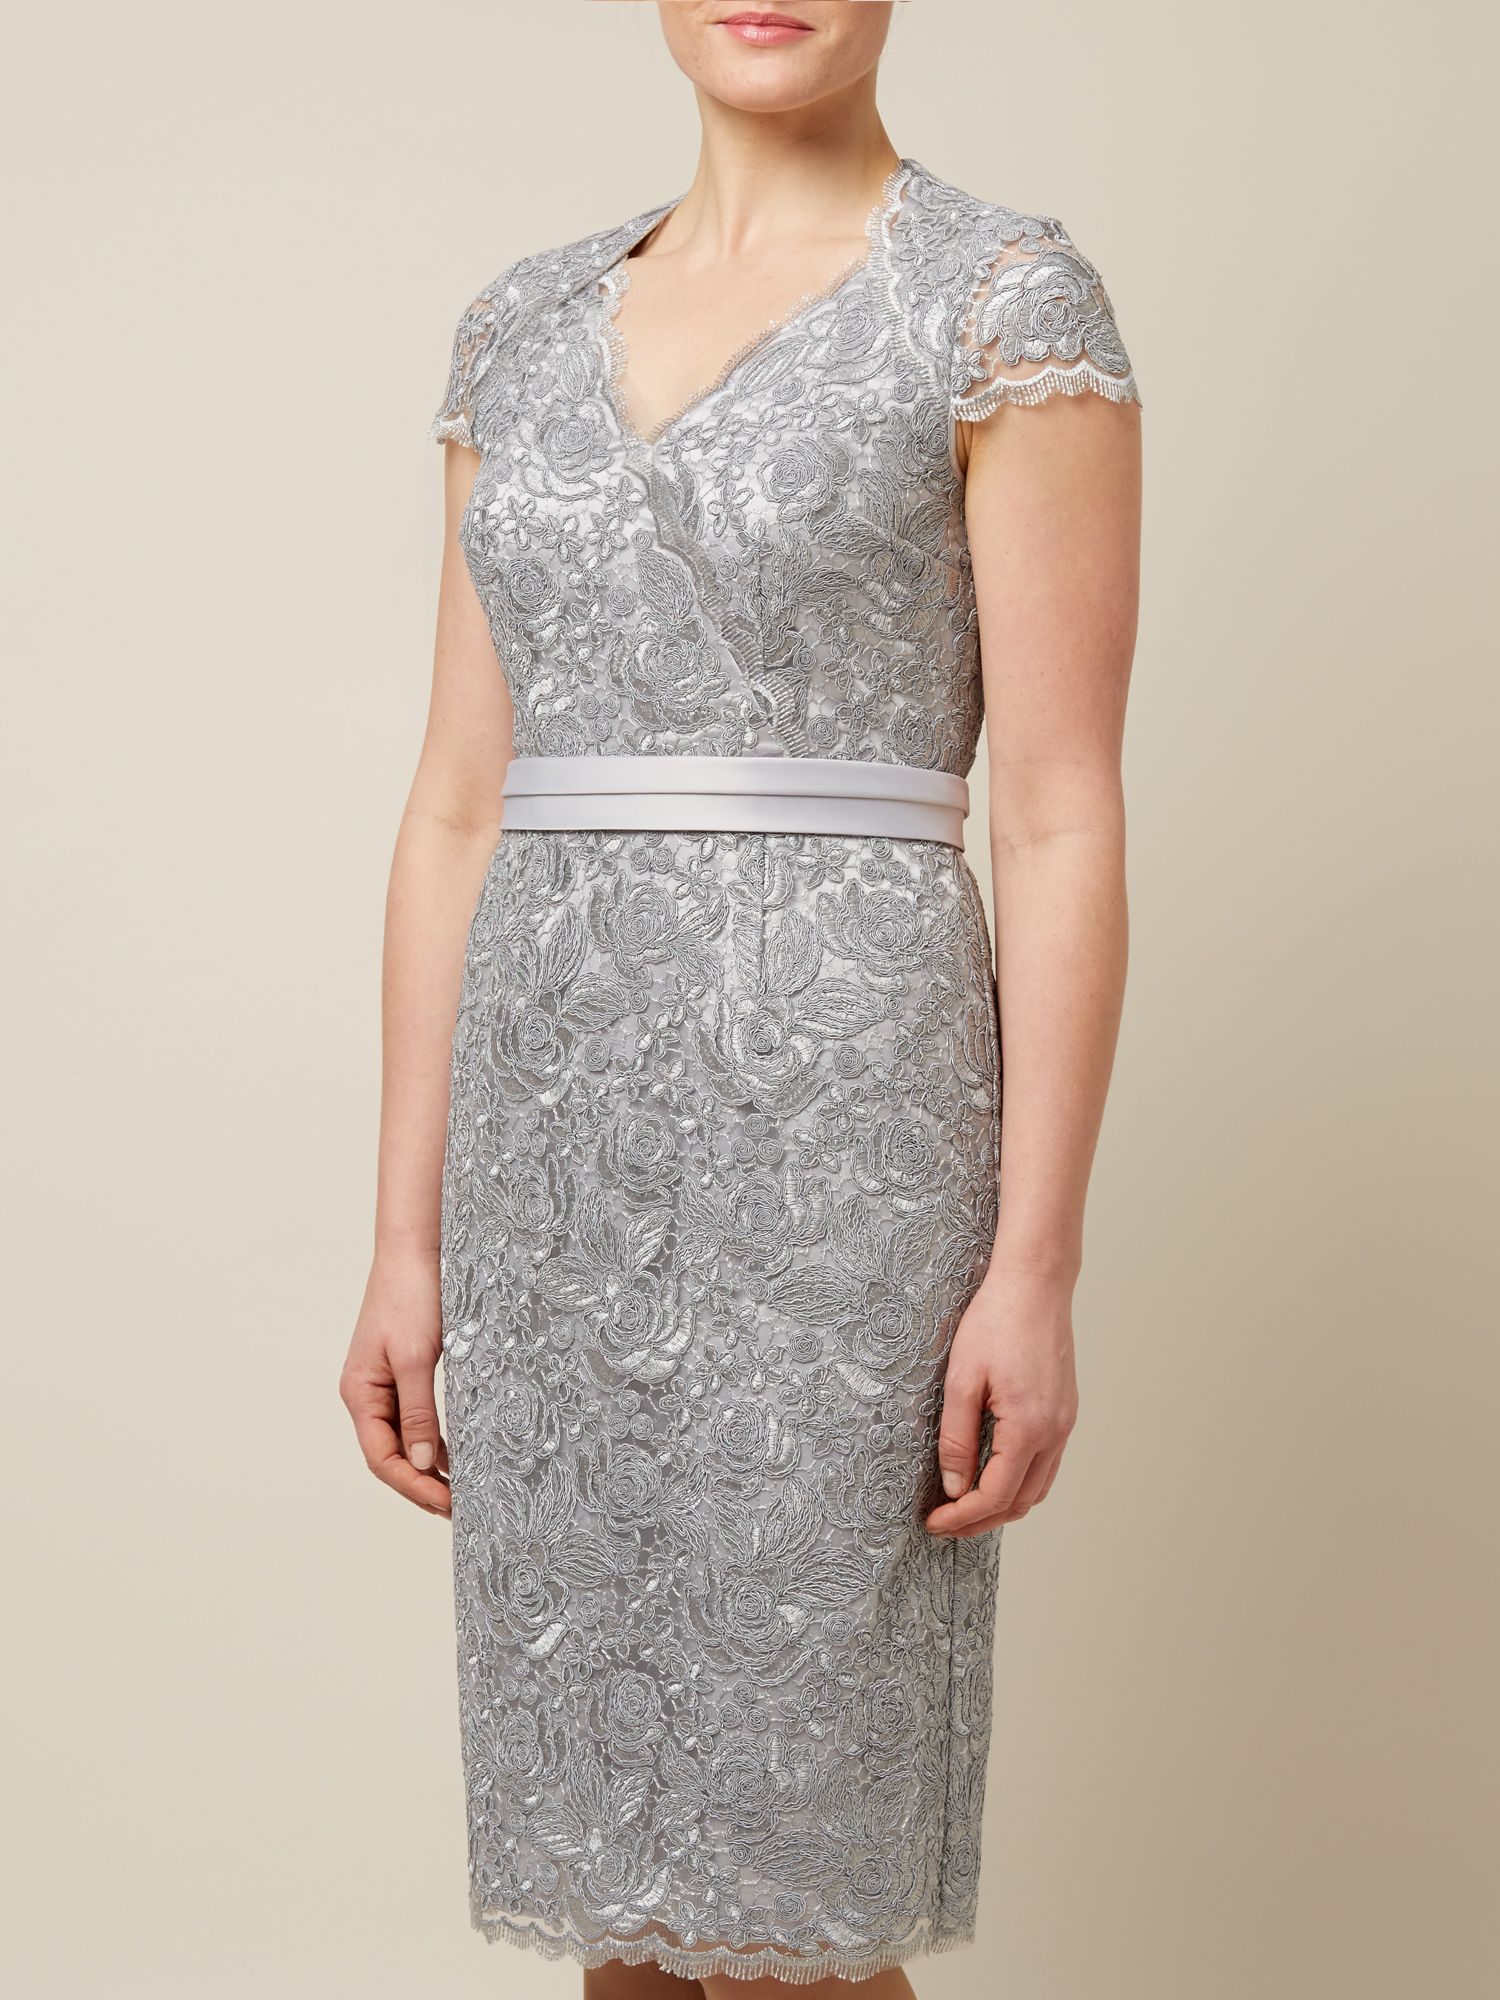 Jacques vert Corded Lace Dress in Metallic | Lyst